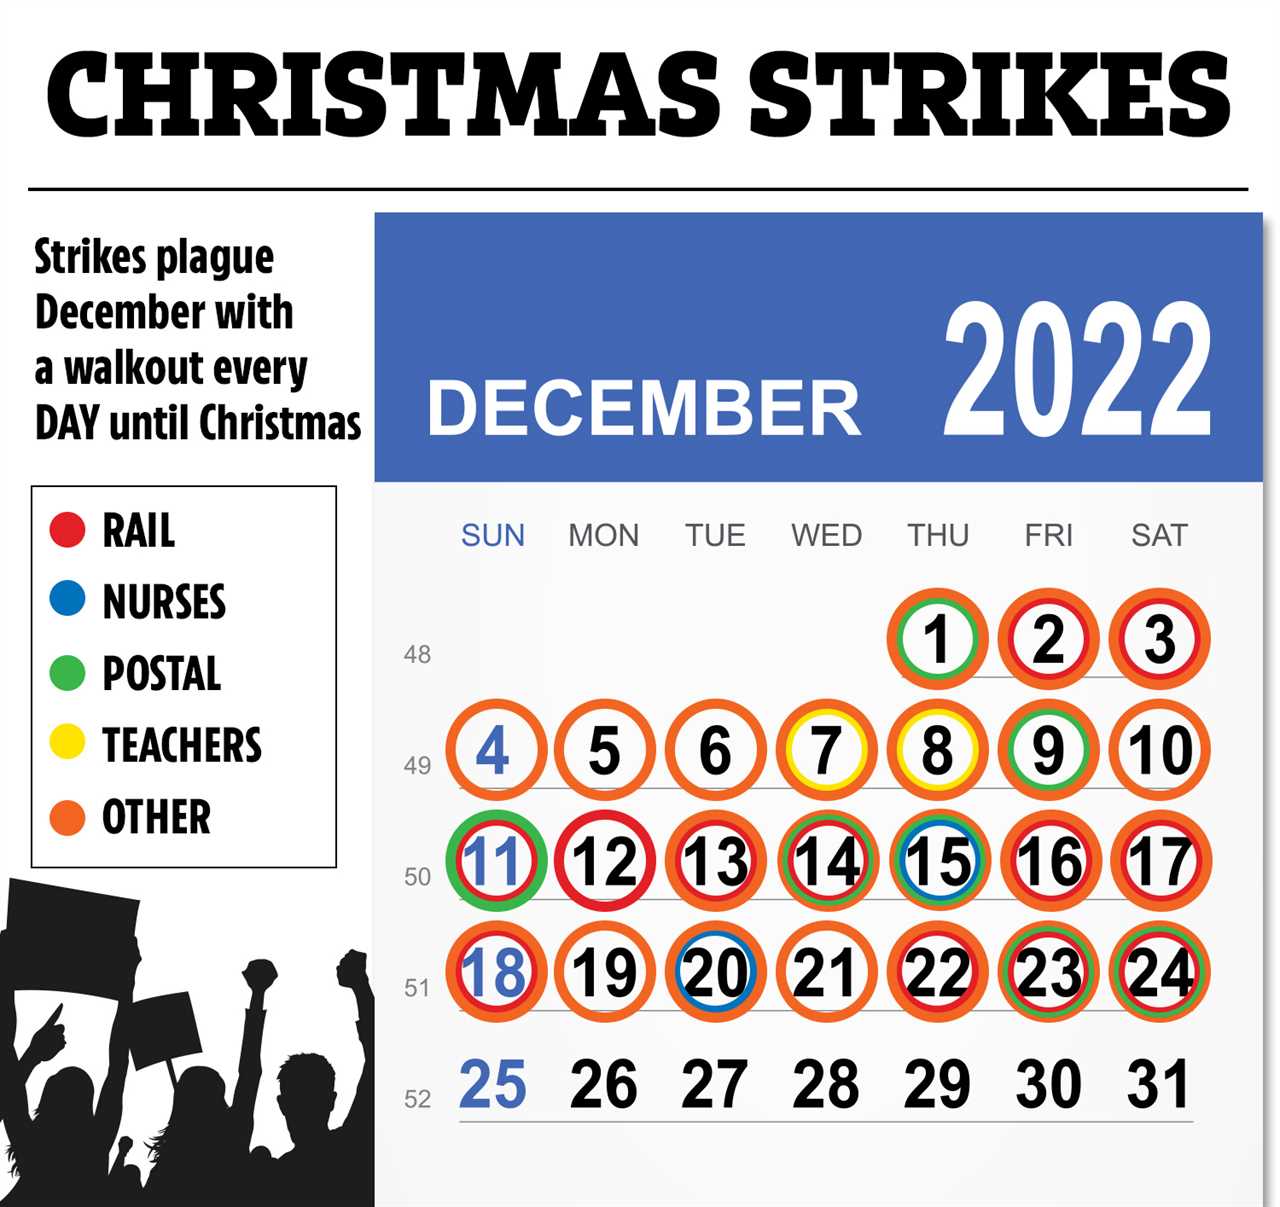 Brits face DAILY strikes until Christmas on trains, post and NHS in new winter of discontent